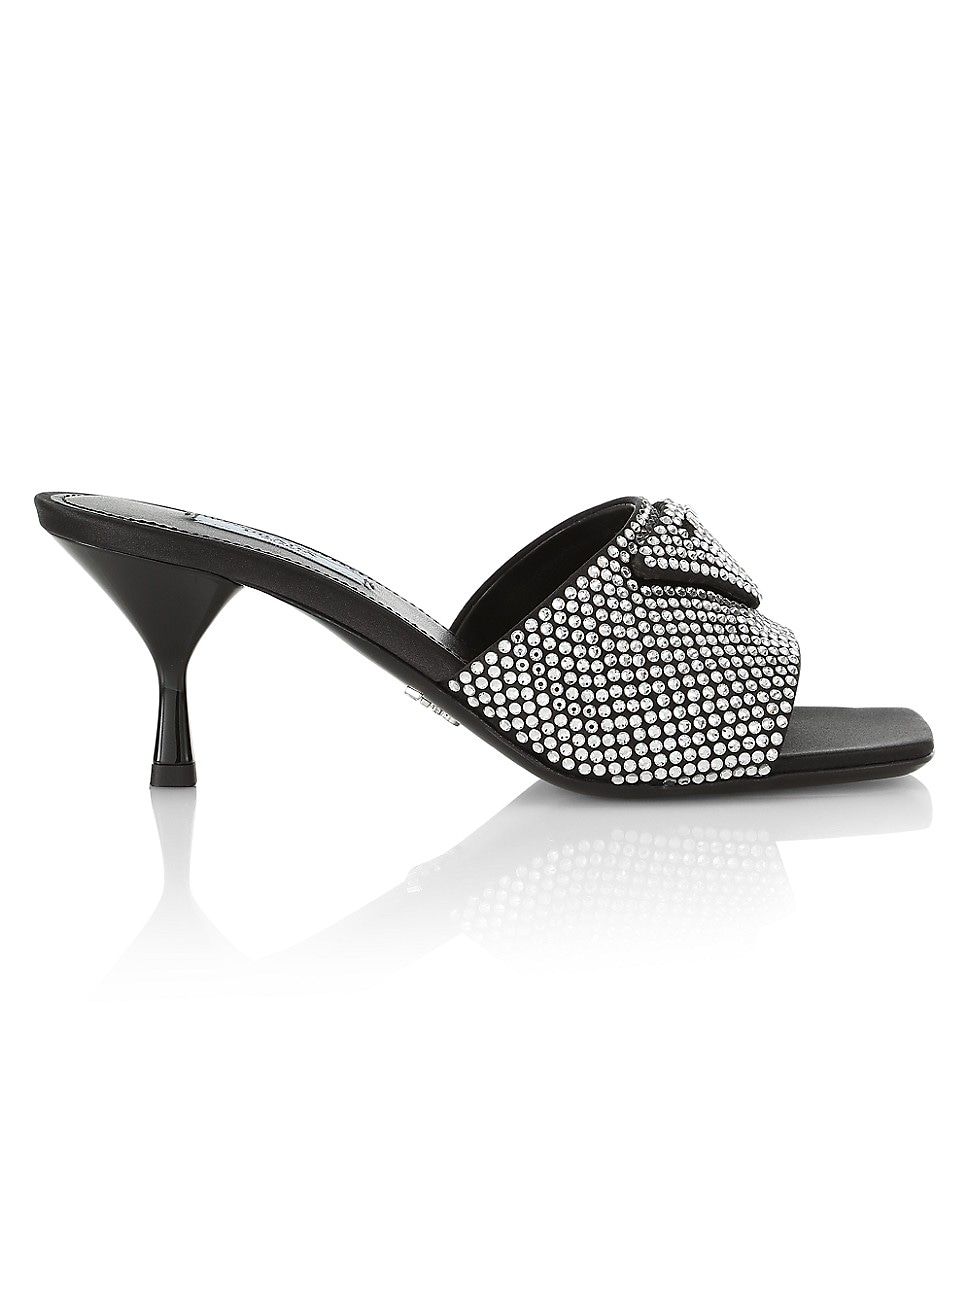 Women's Crystal-Embellished Mules - Crystal - Size 5 | Saks Fifth Avenue